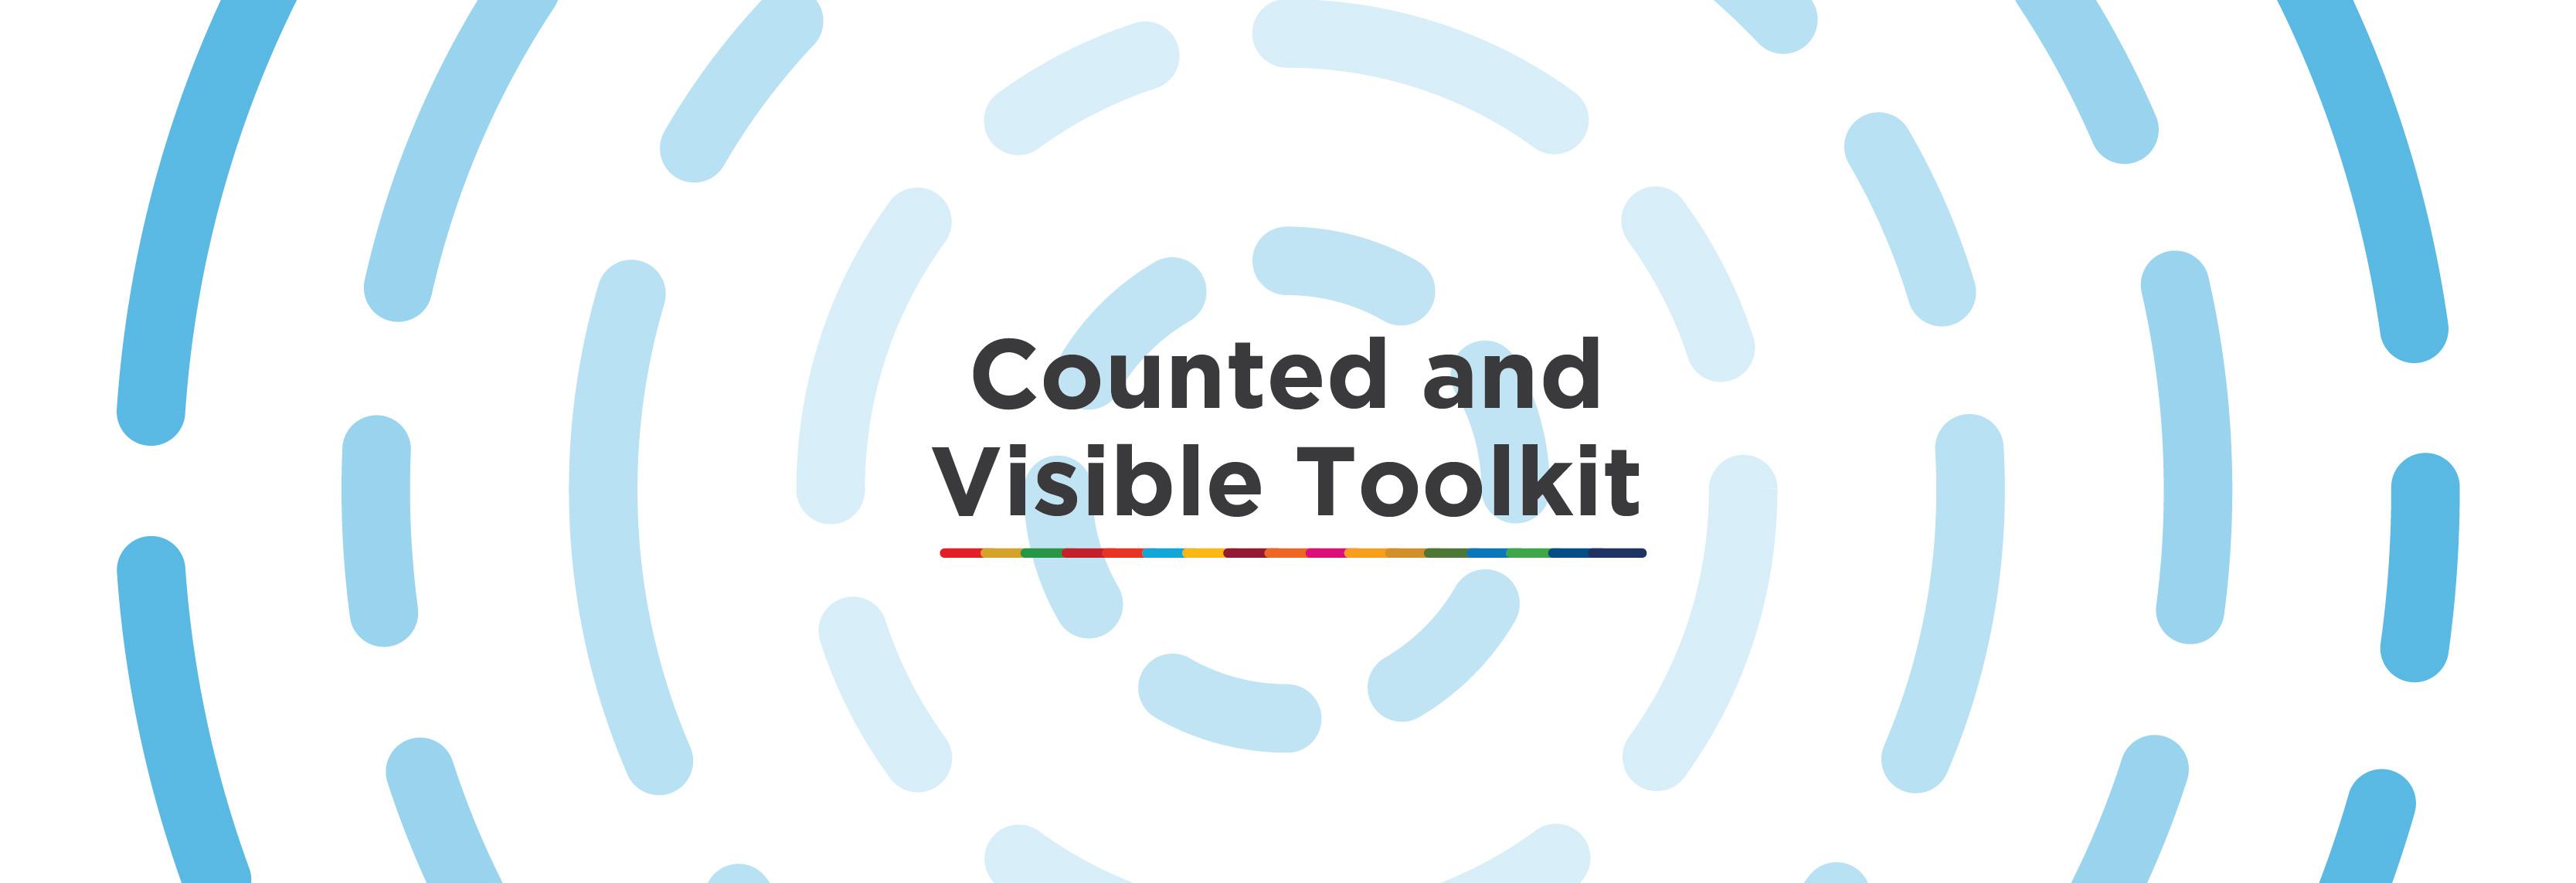 Counted and Visible toolkit